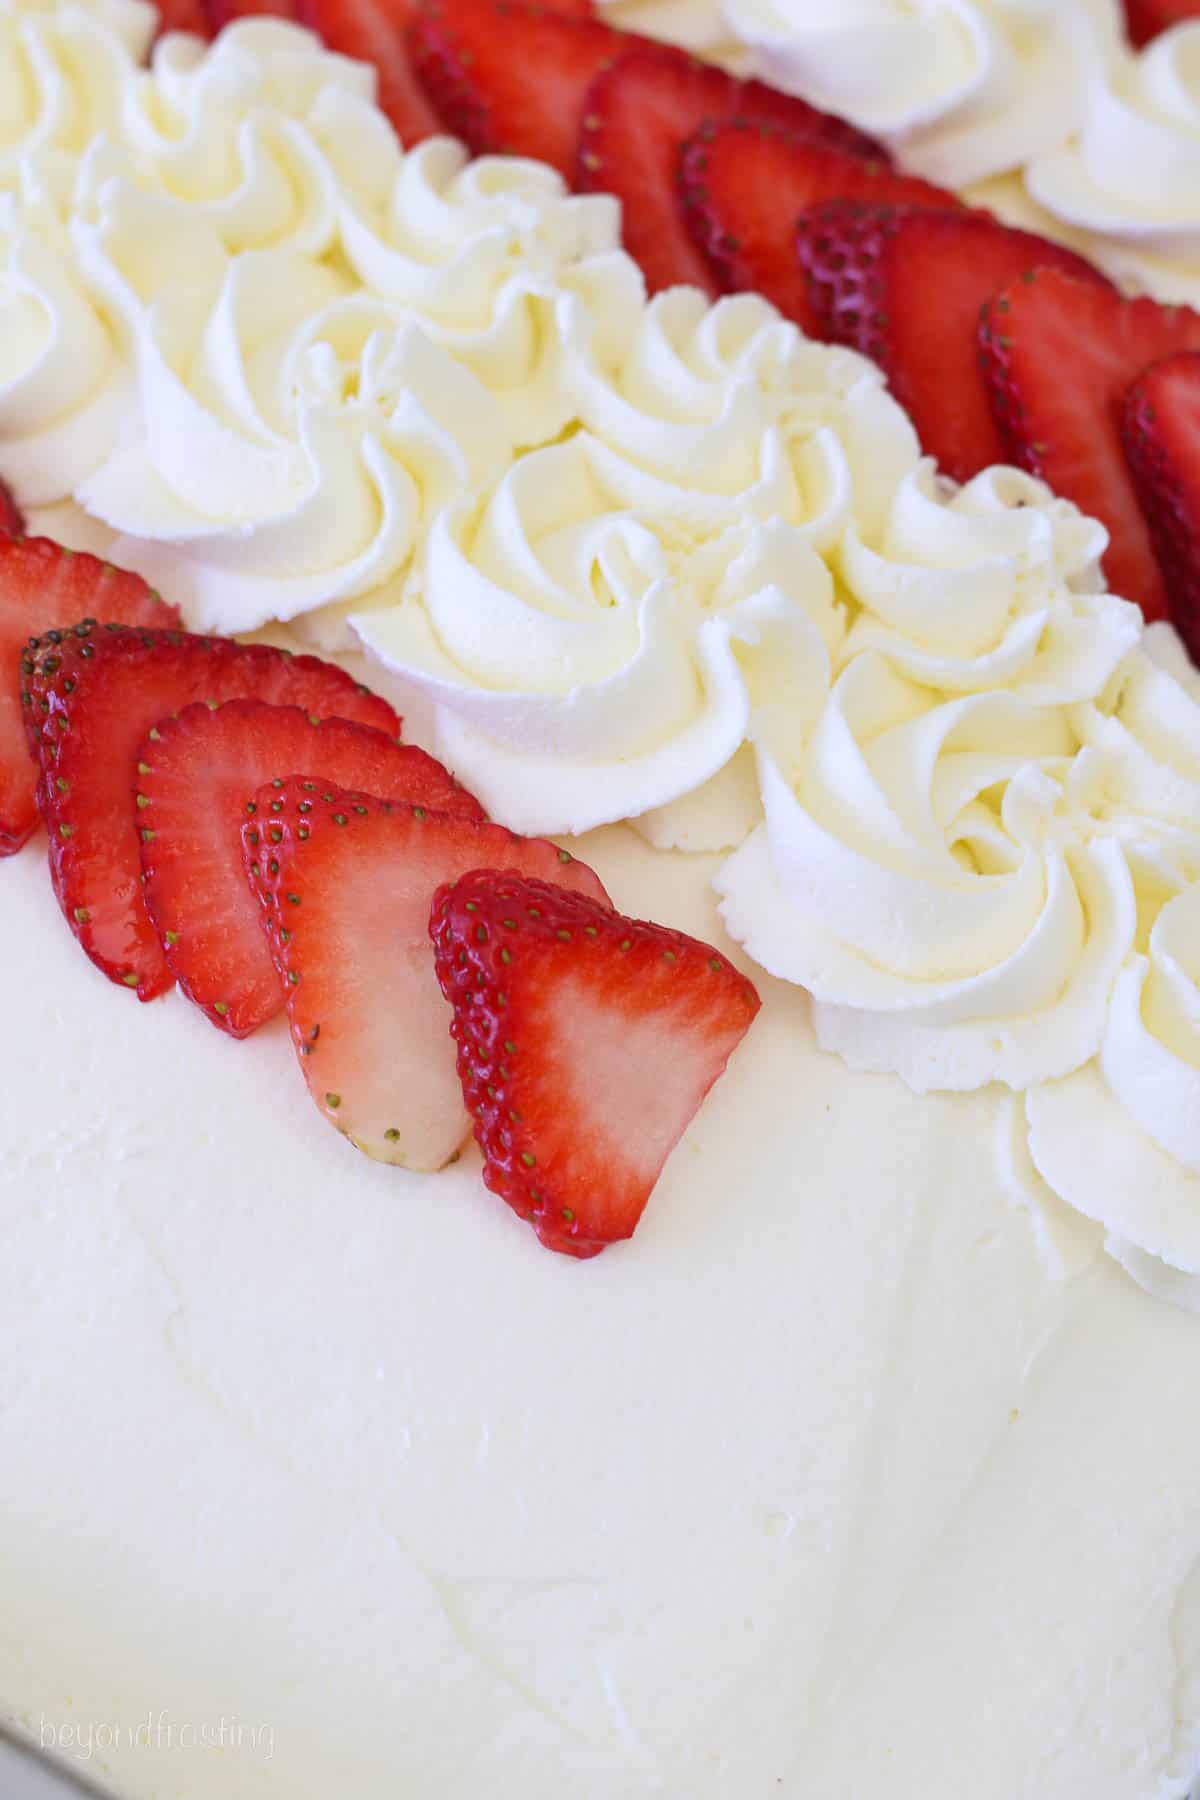 Step by step photo for decorating a flag cake with strawberries and whipped cream